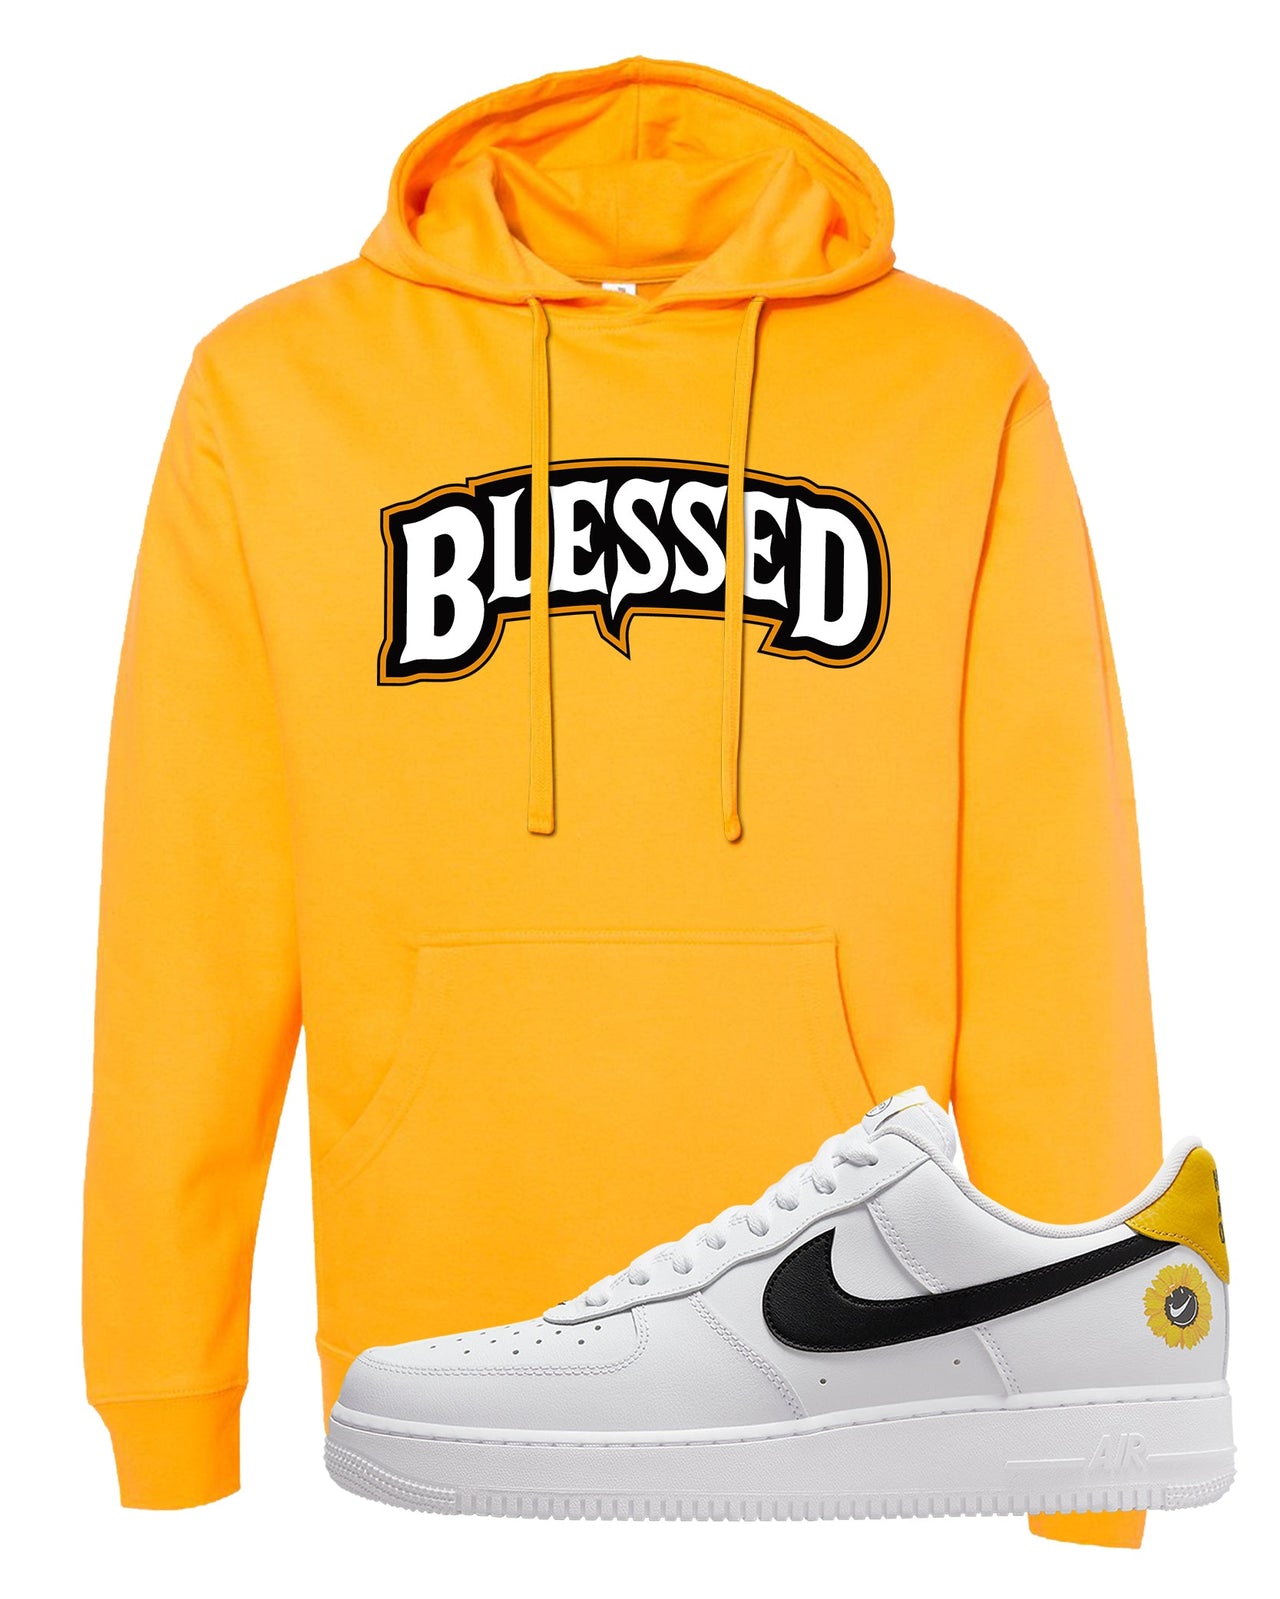 Have A Nice Day AF1s Hoodie | Blessed Arch, Gold